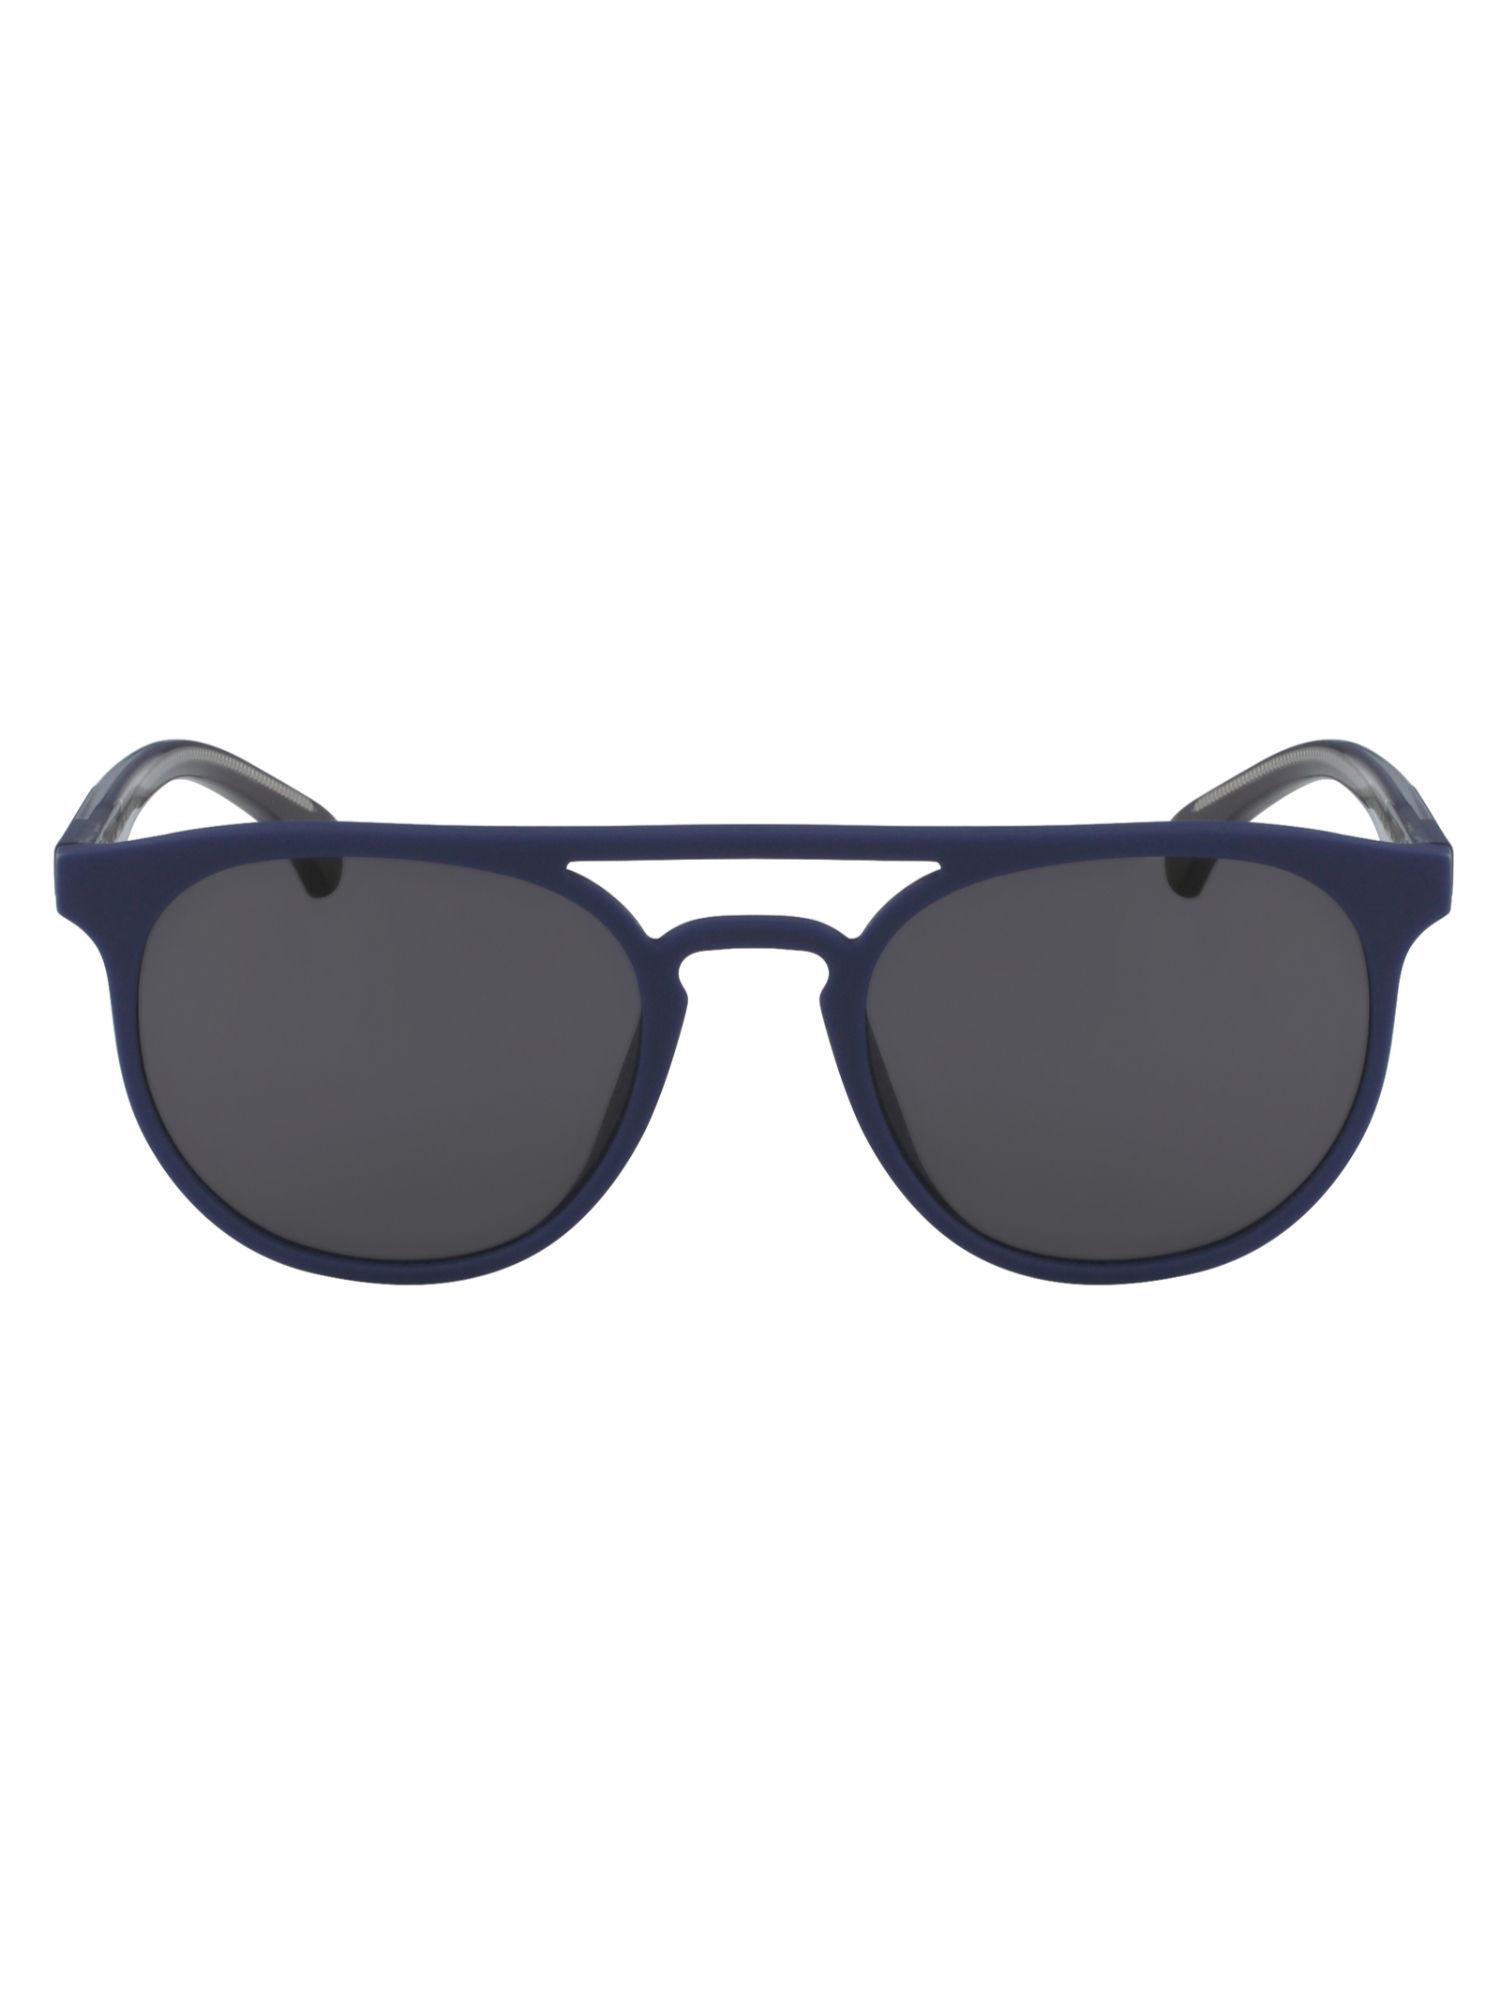 round-sunglasses-with-grey-lens-for-men